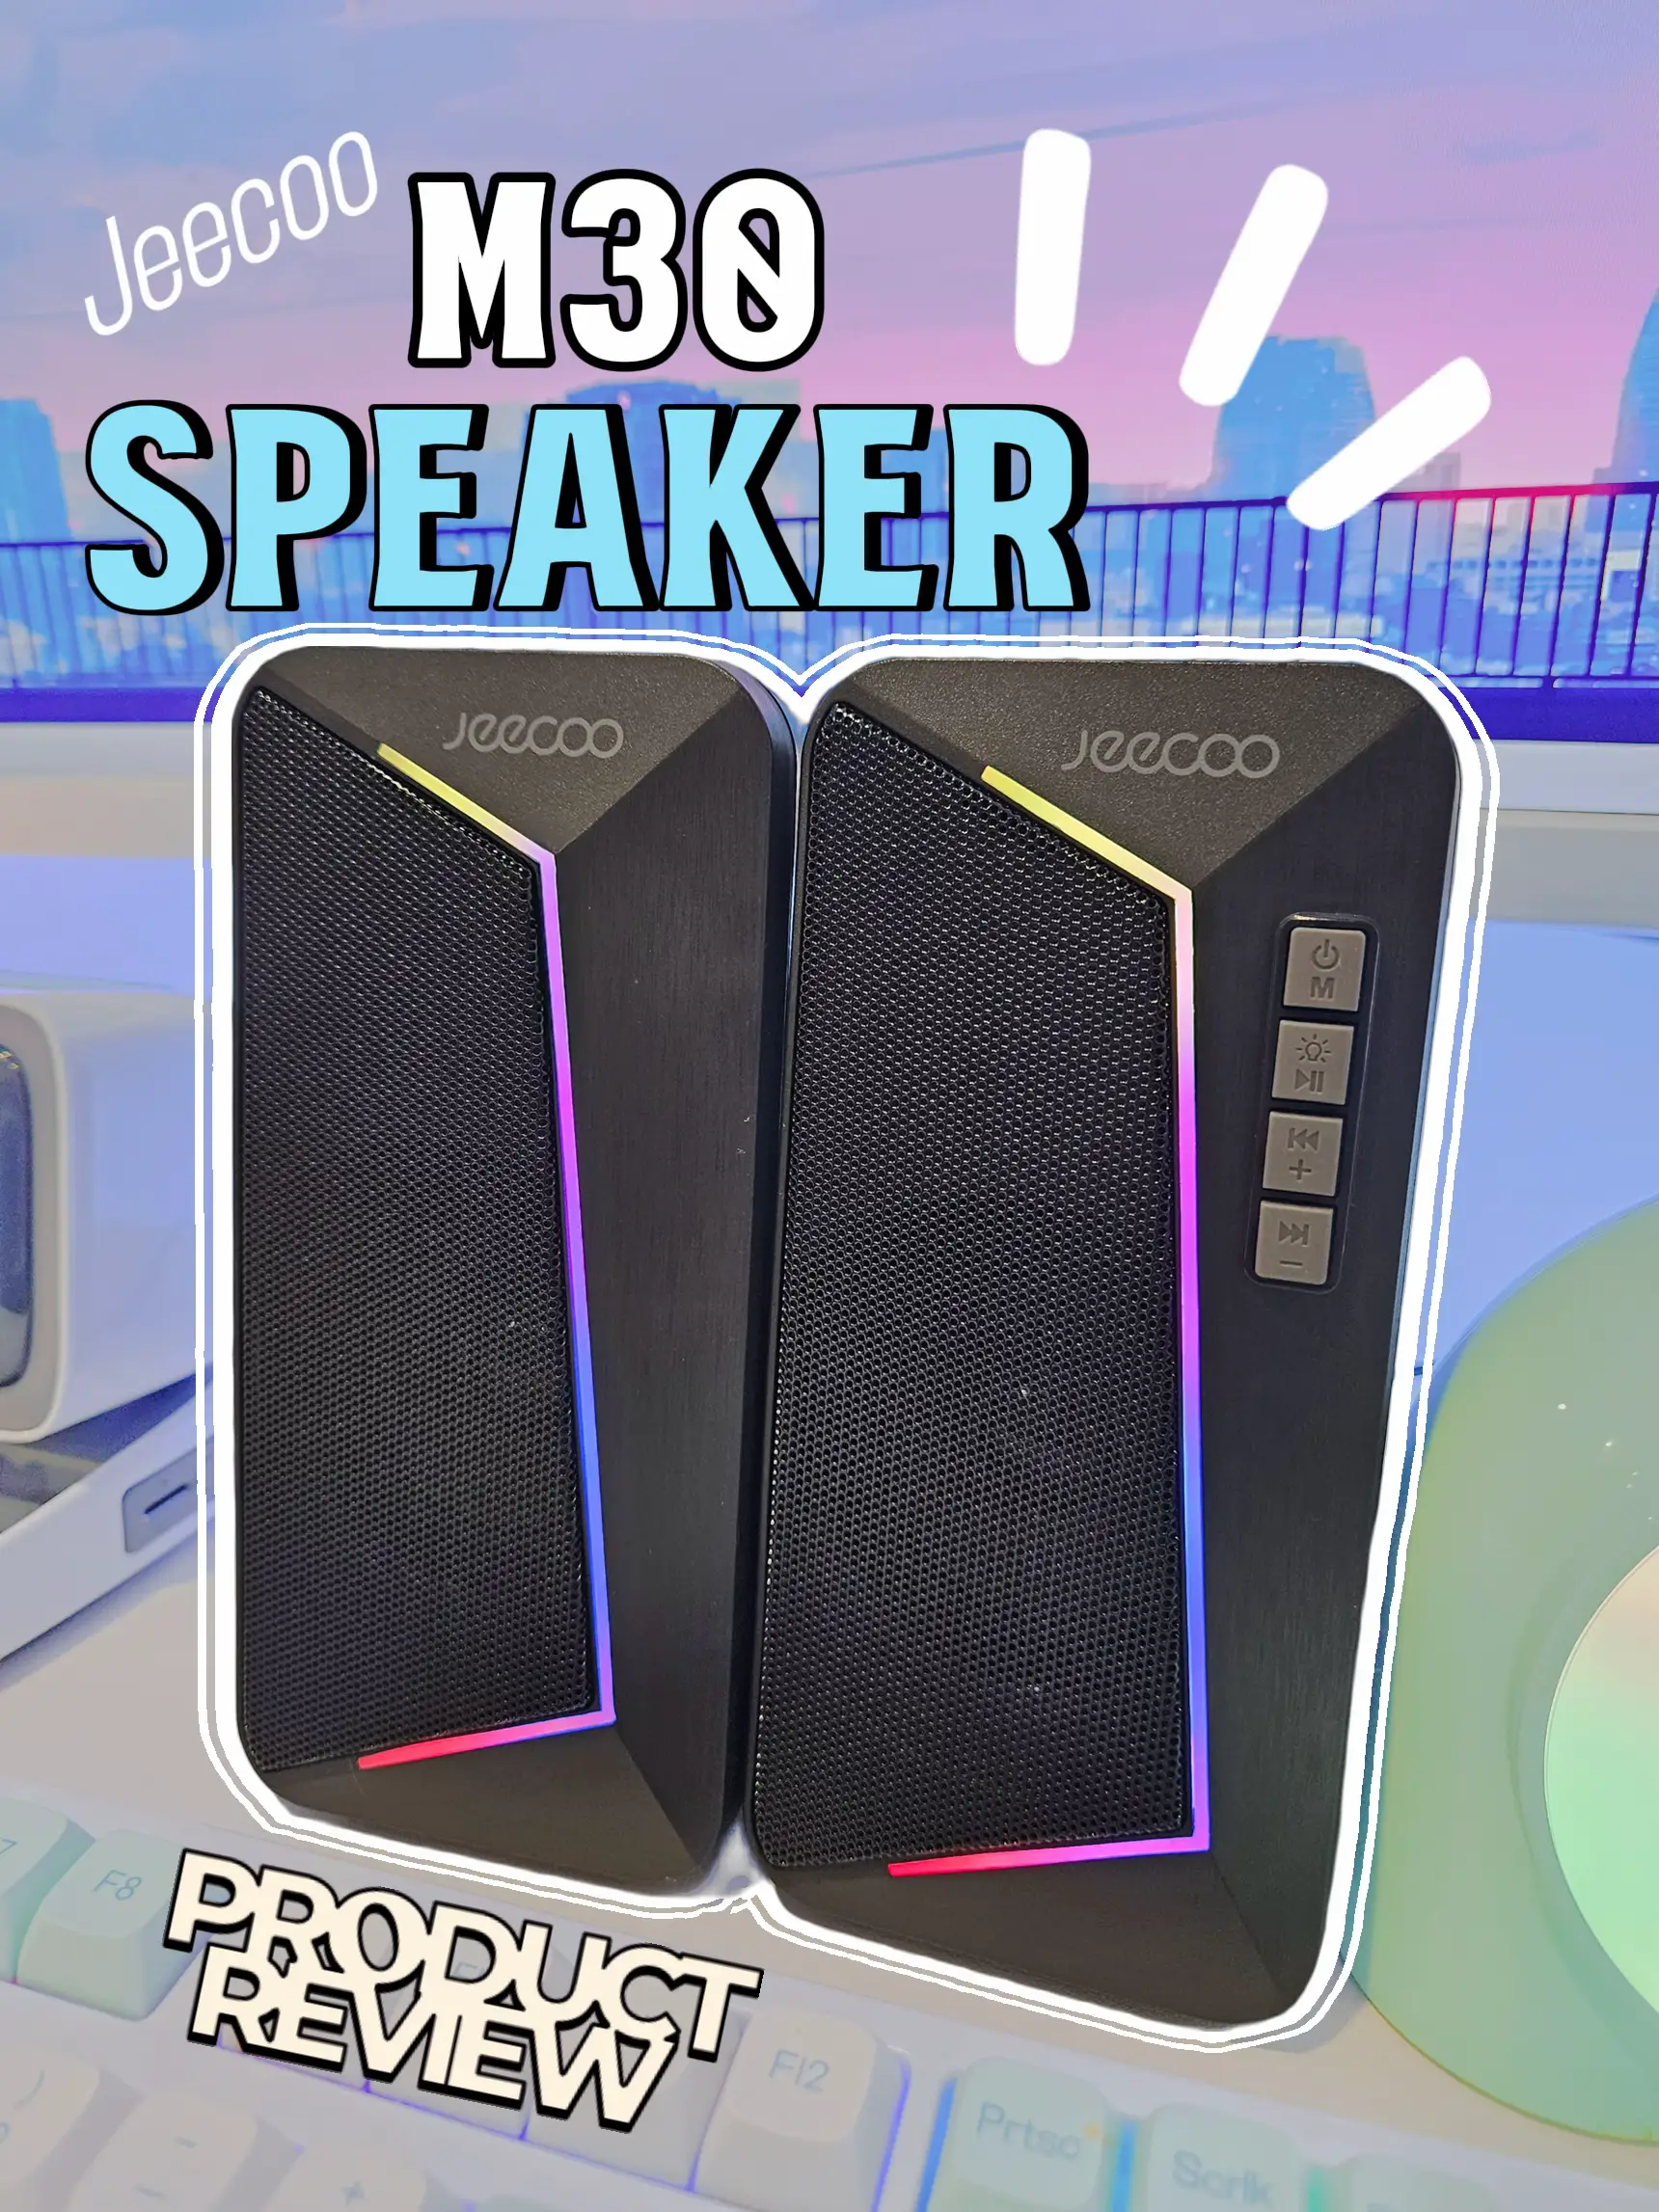 powerful speakers with dynamic bass levels - Lemon8 Search